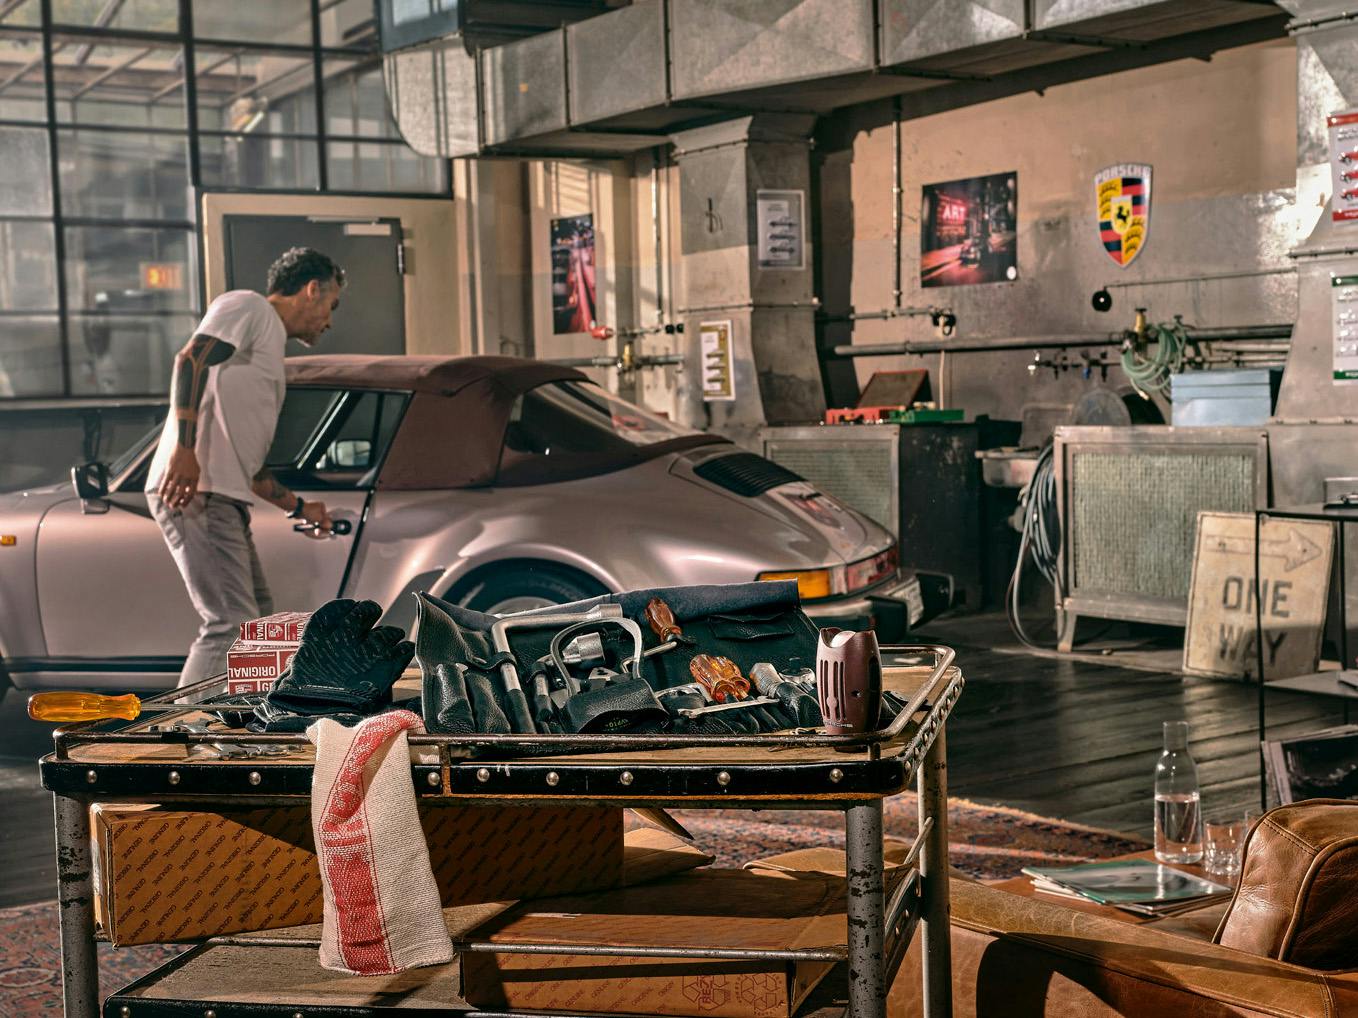 Shown is a detail of a Soul Garage with a man opening his silver vintage Porsche car in the background and a Porsche tool bag in the foreground.